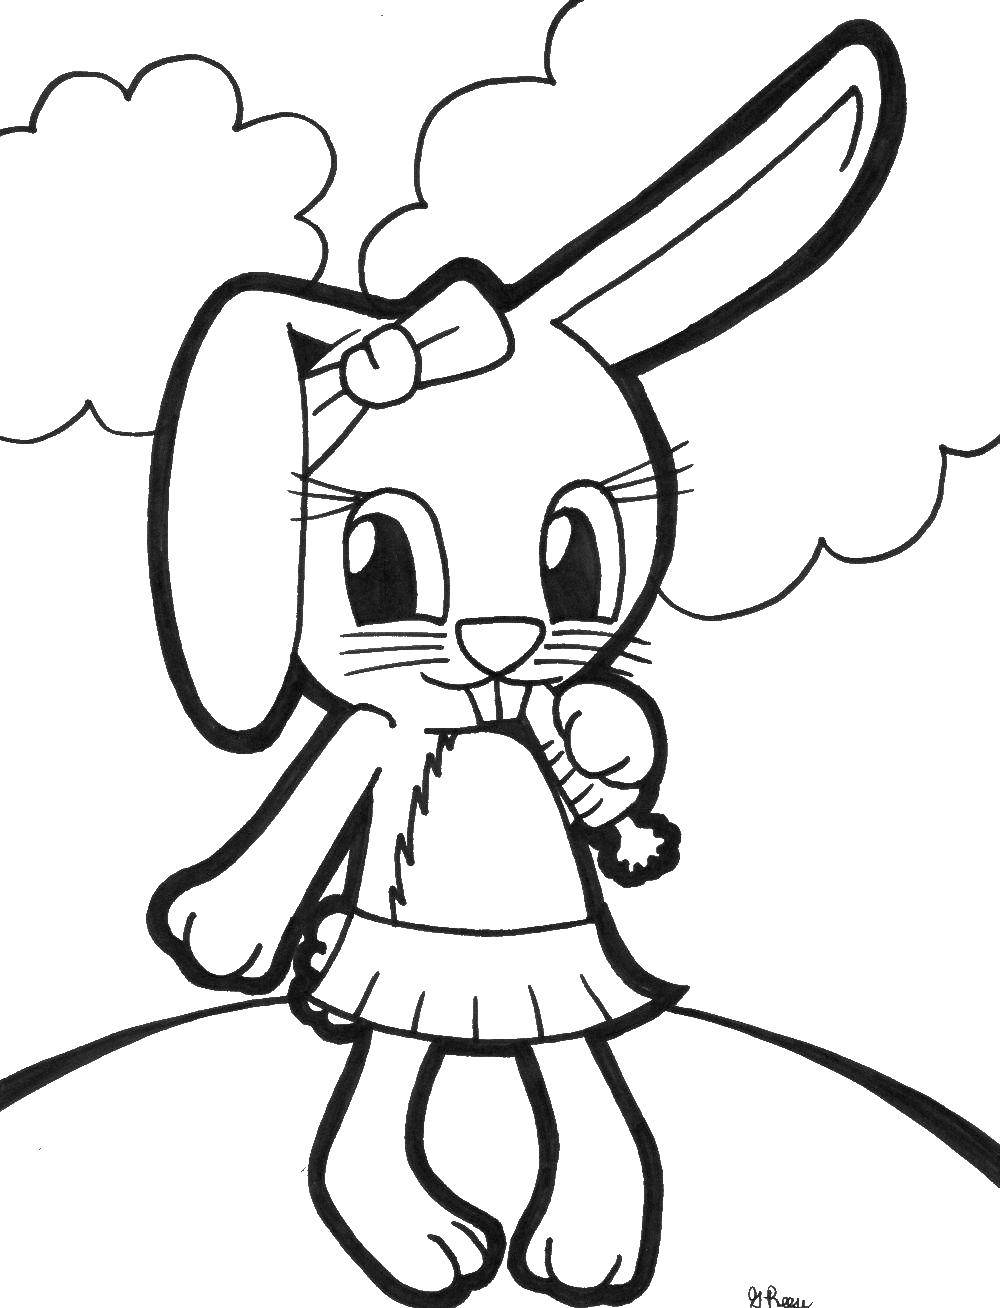 Coloring Zaychiha with a carrot. Category Animals. Tags:  Animals, Bunny.